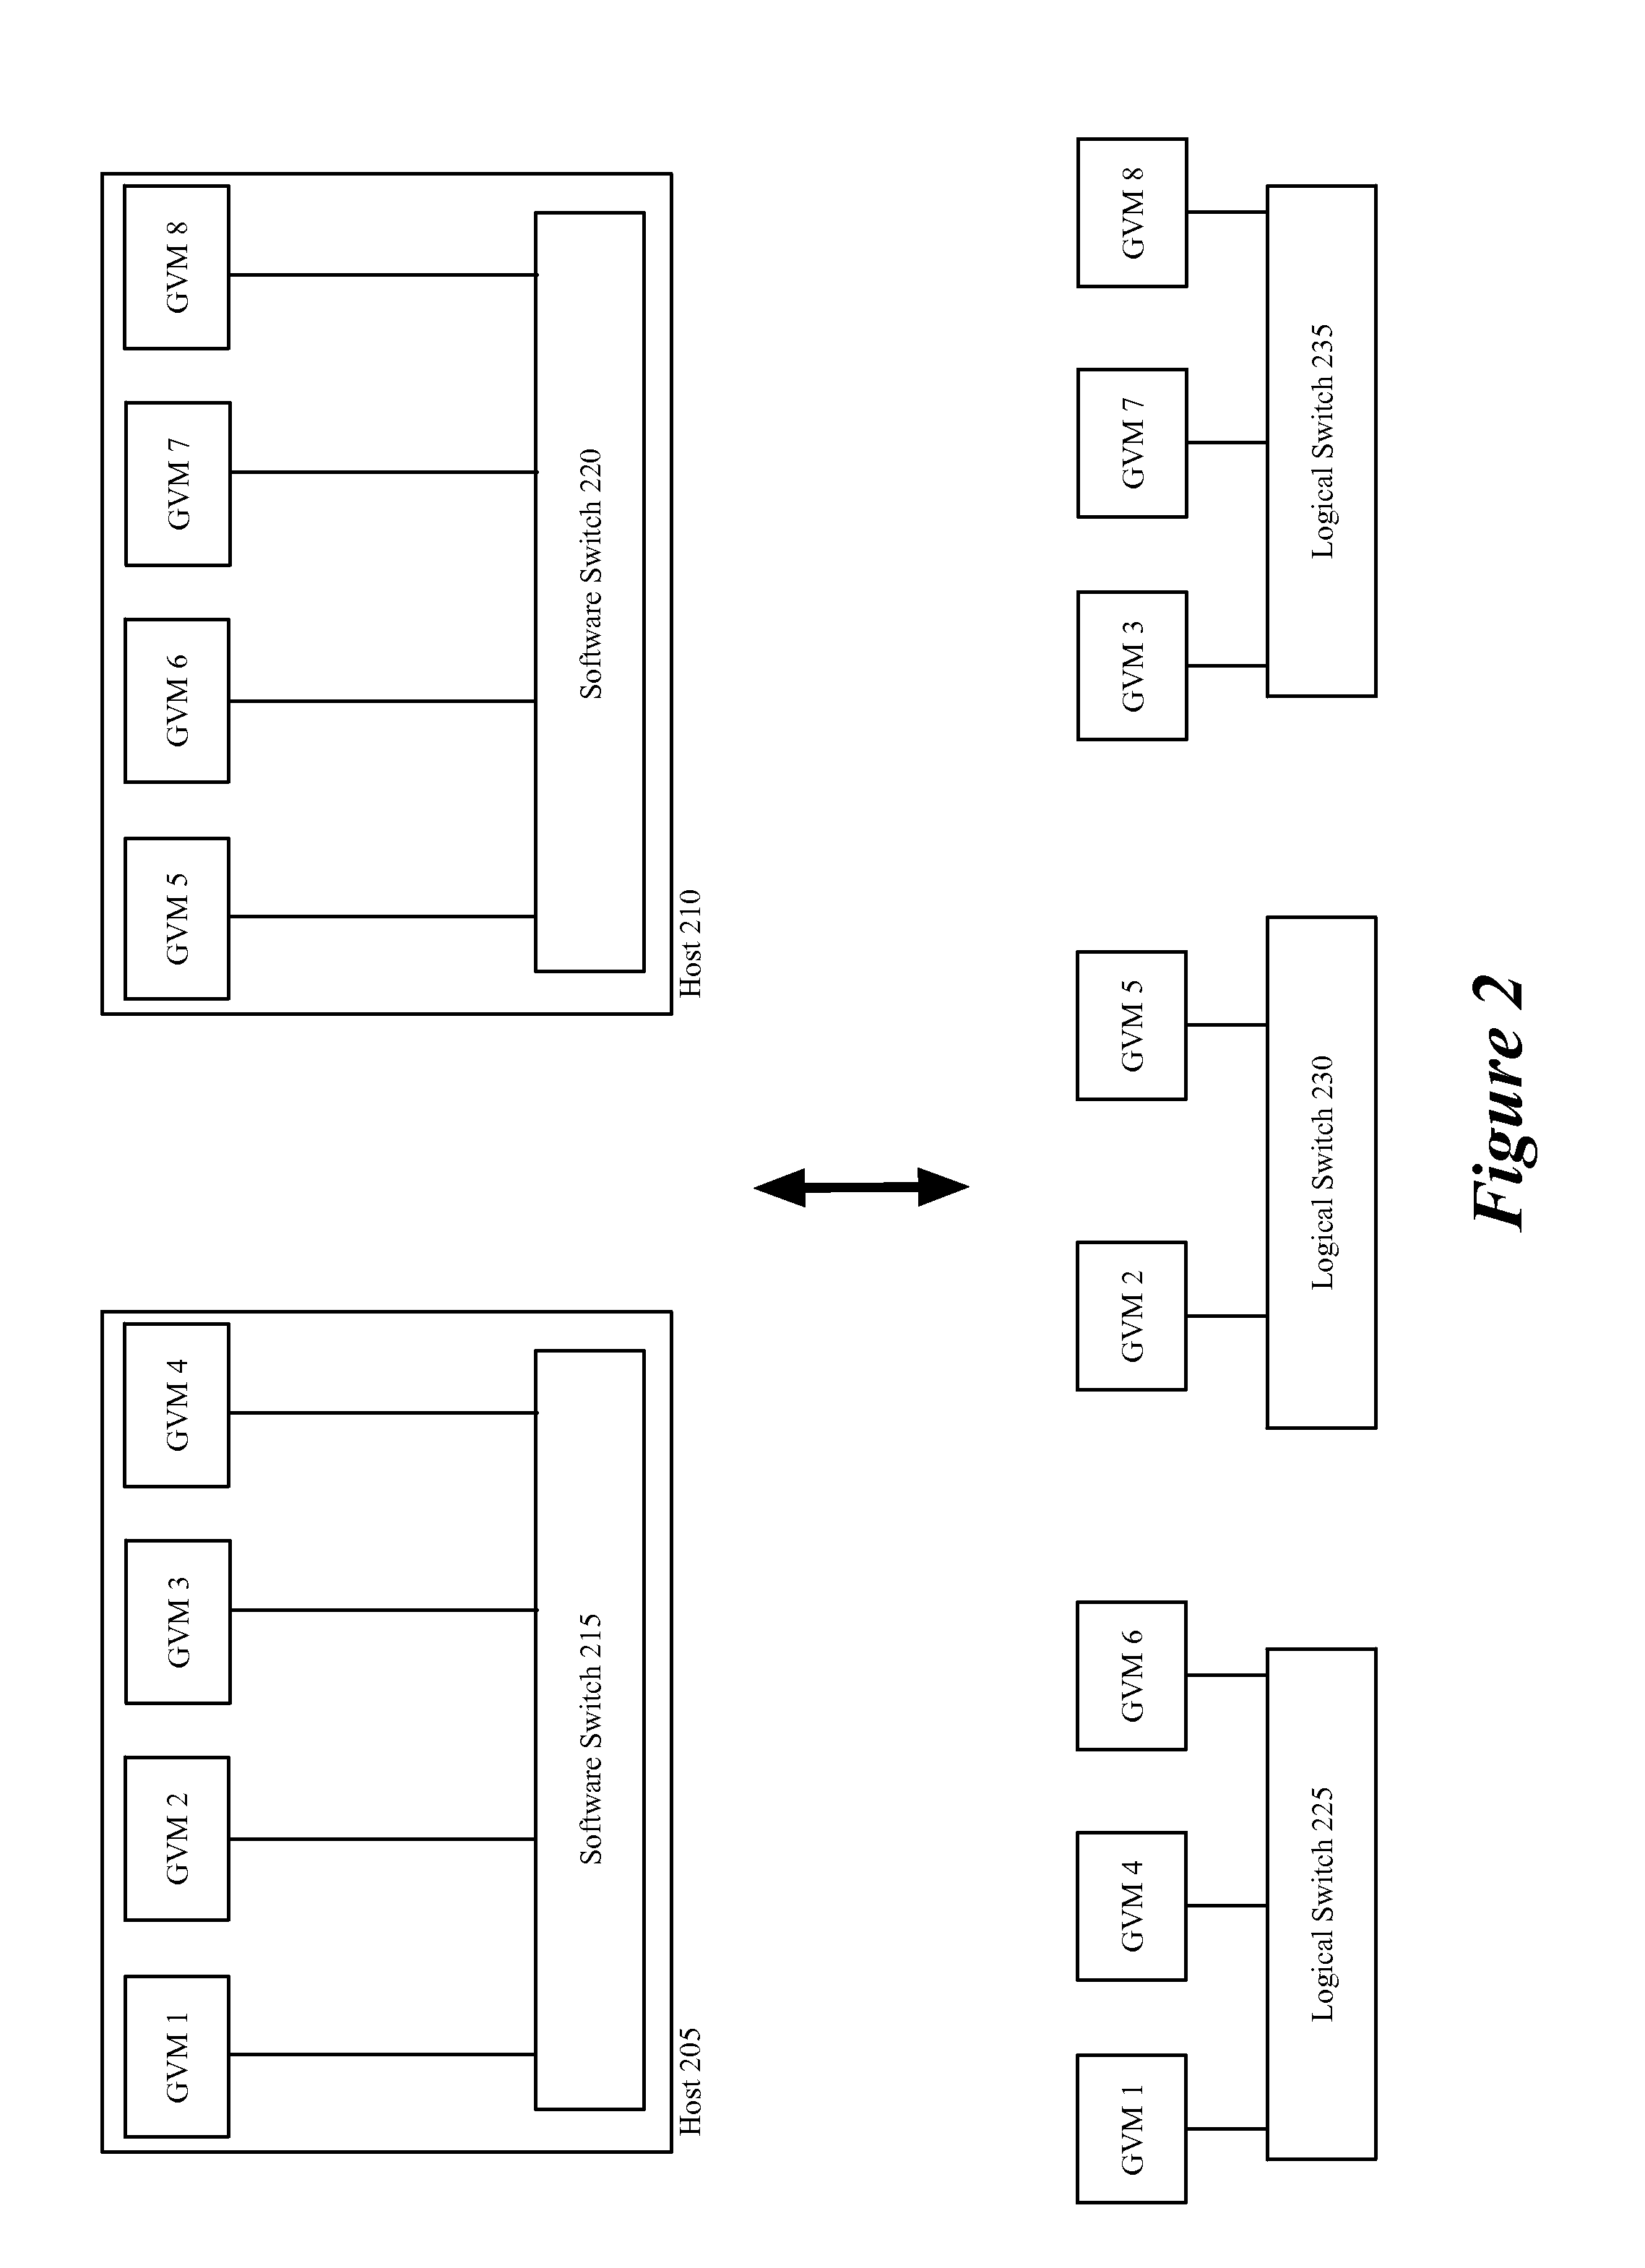 Migrating firewall connection state for a firewall service virtual machine